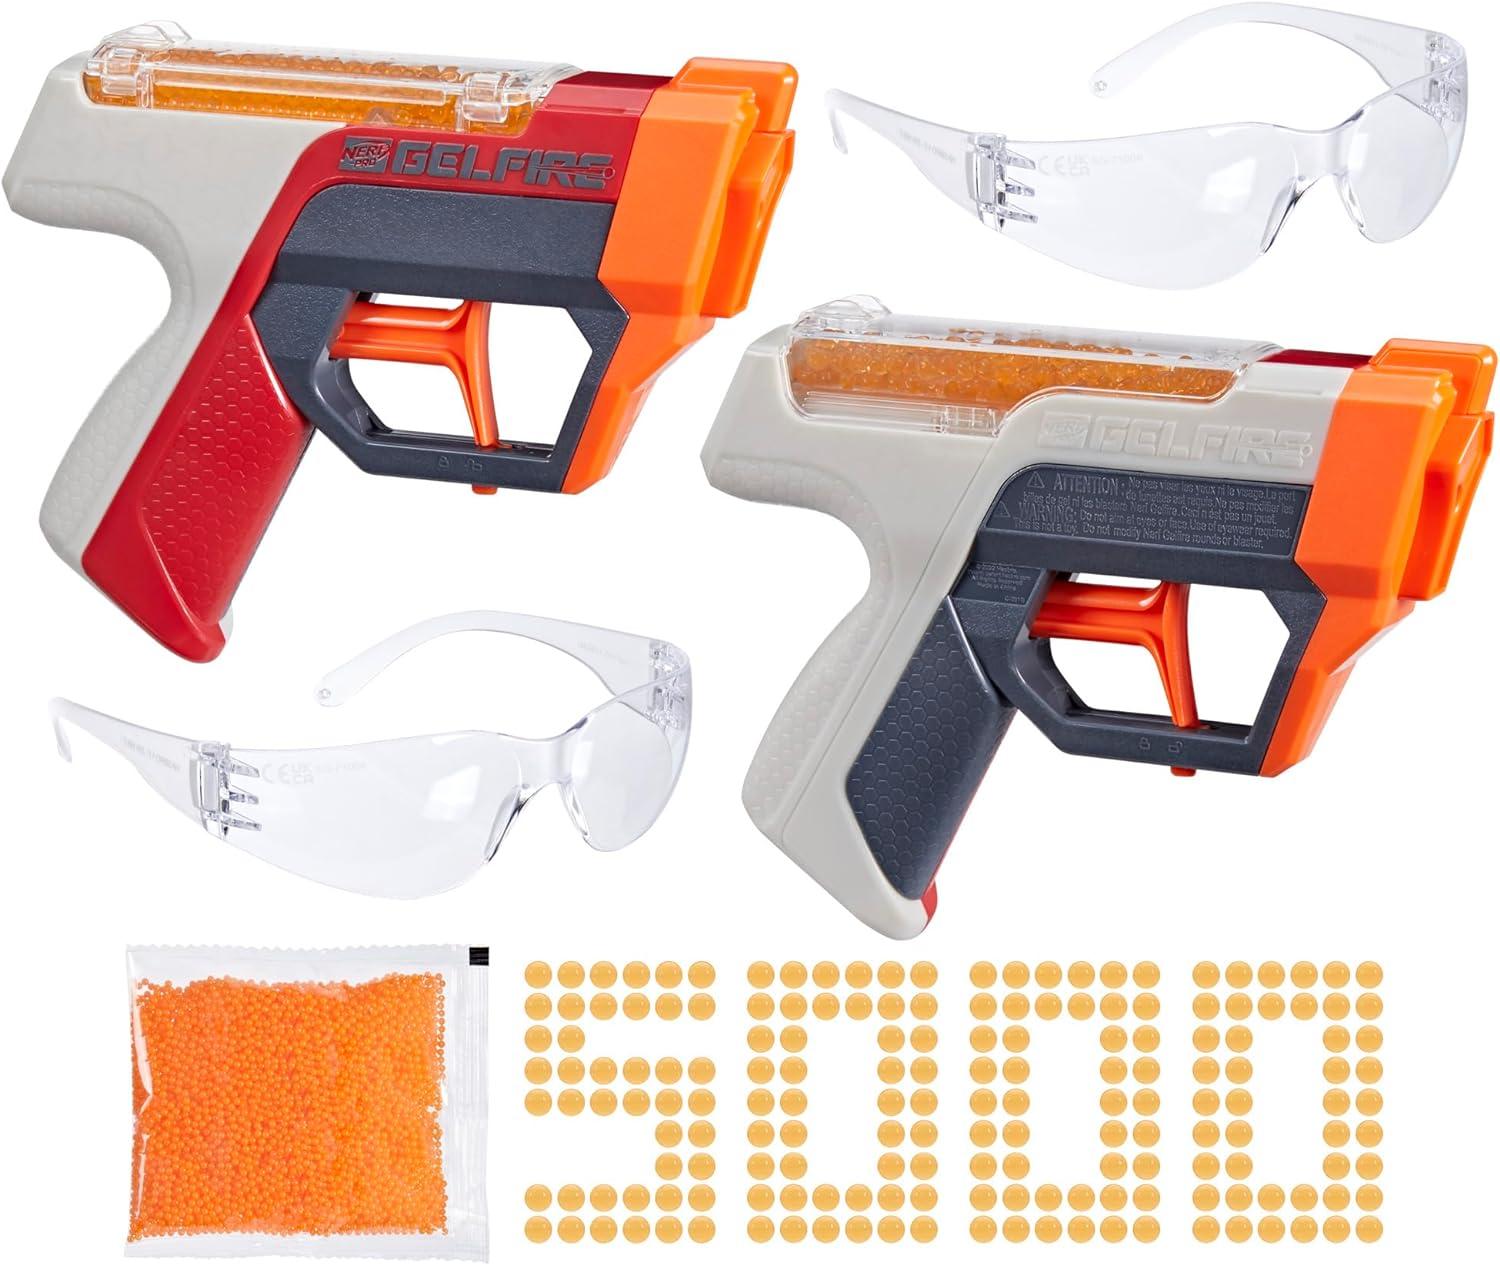 NERF Pro Gelfire Dual Wield Pack with 5000 Rounds for $7.49